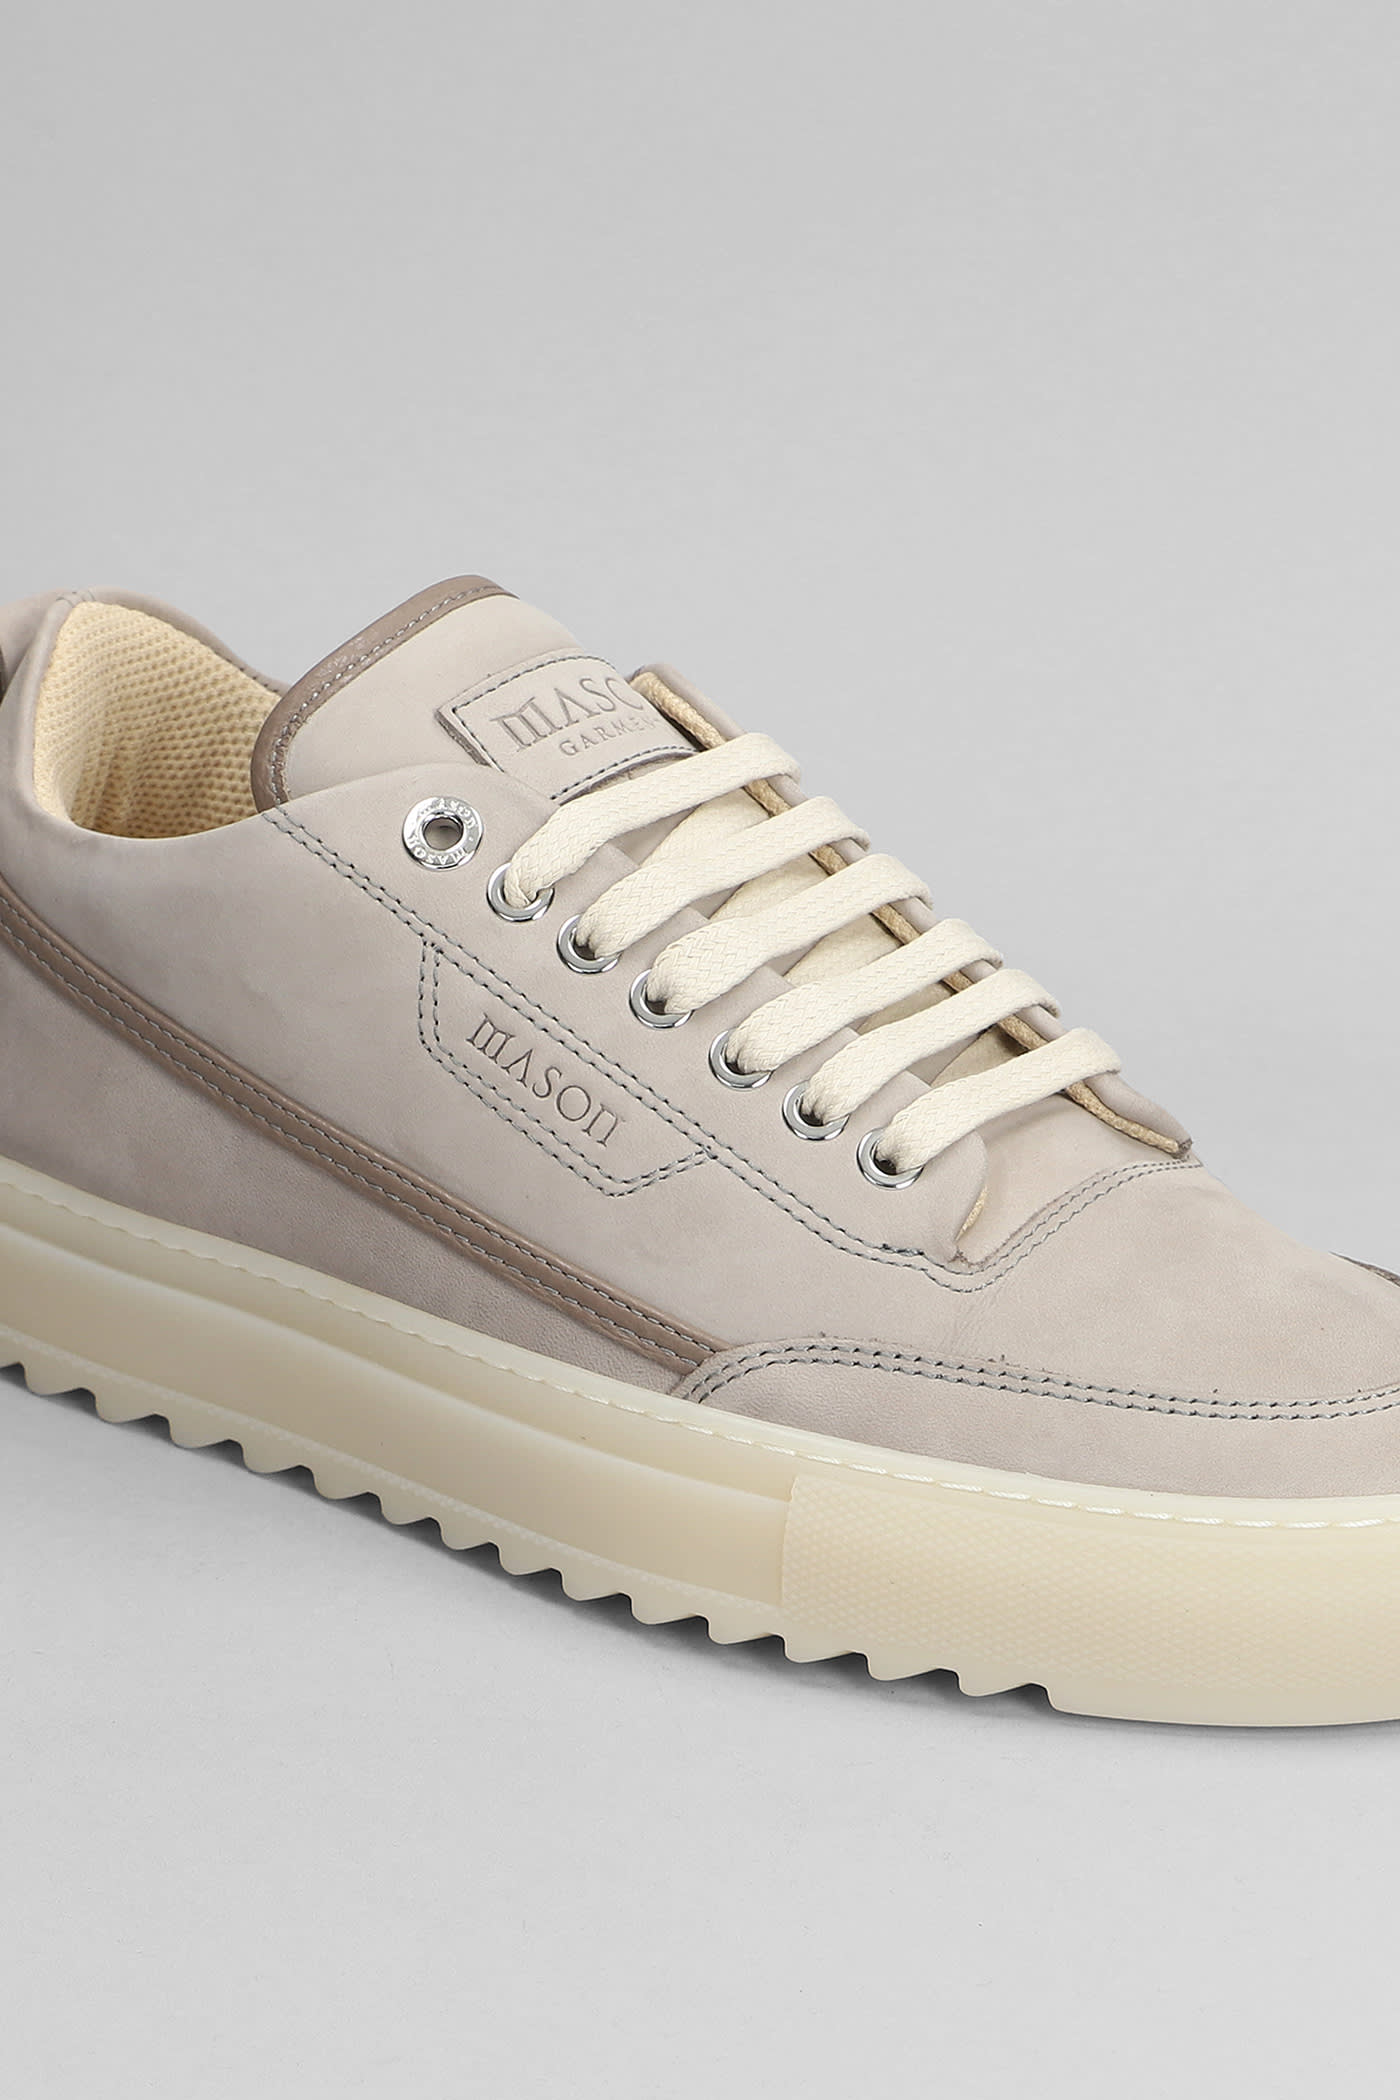 Shop Mason Garments Torino Sneakers In Taupe Leather